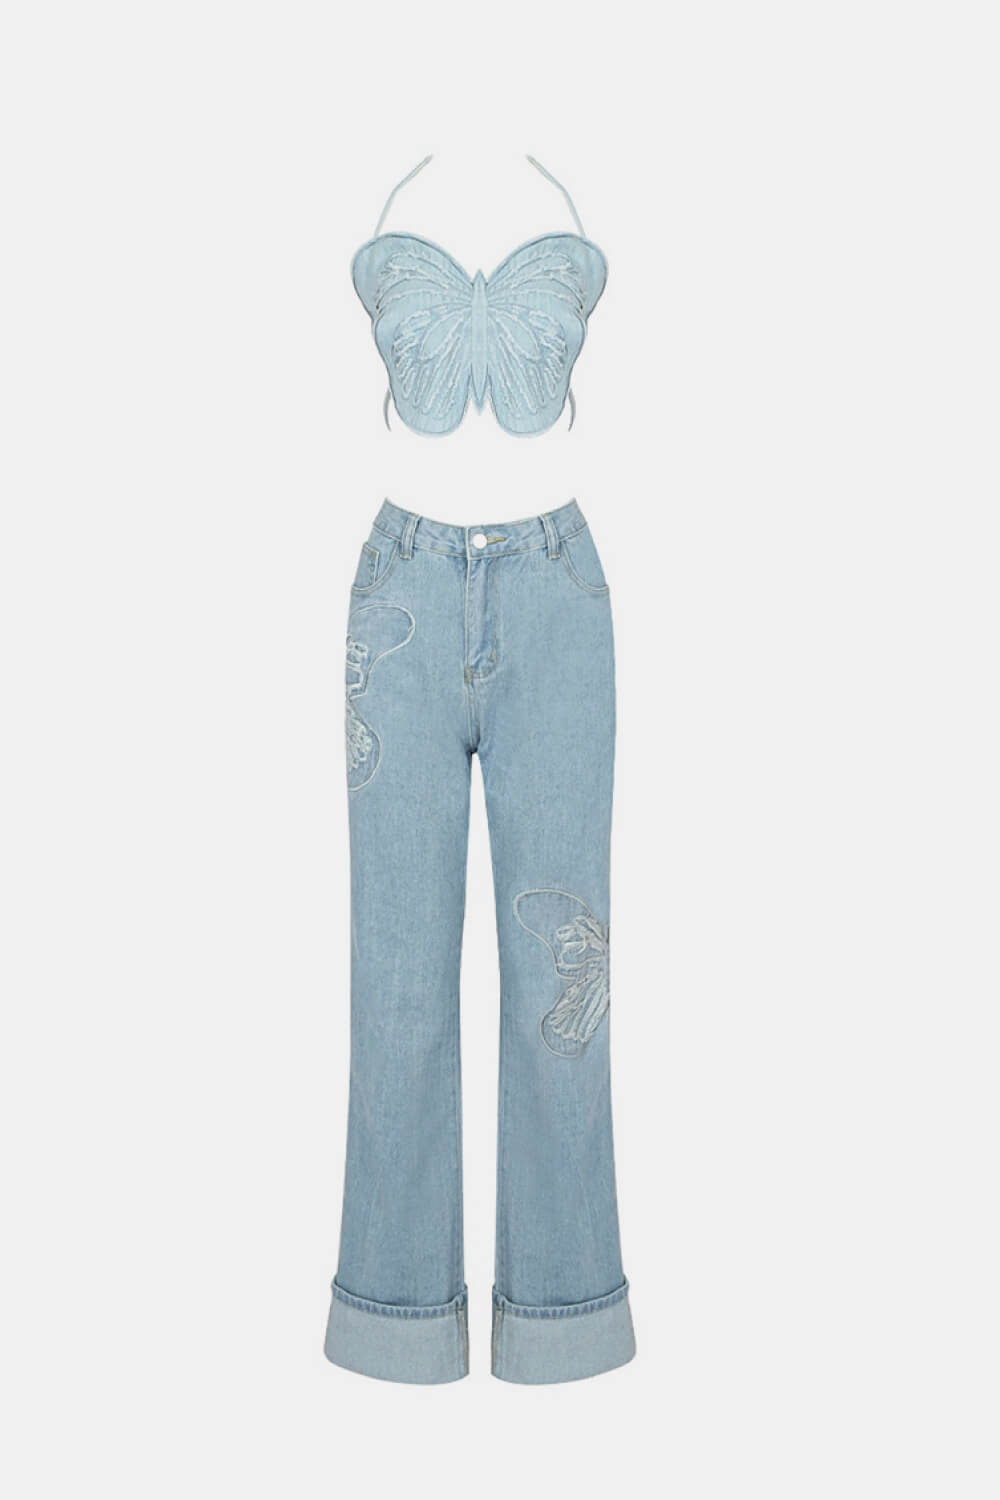 Butterfly Halter Neck Denim Top and Jeans Set BLUE ZONE PLANET